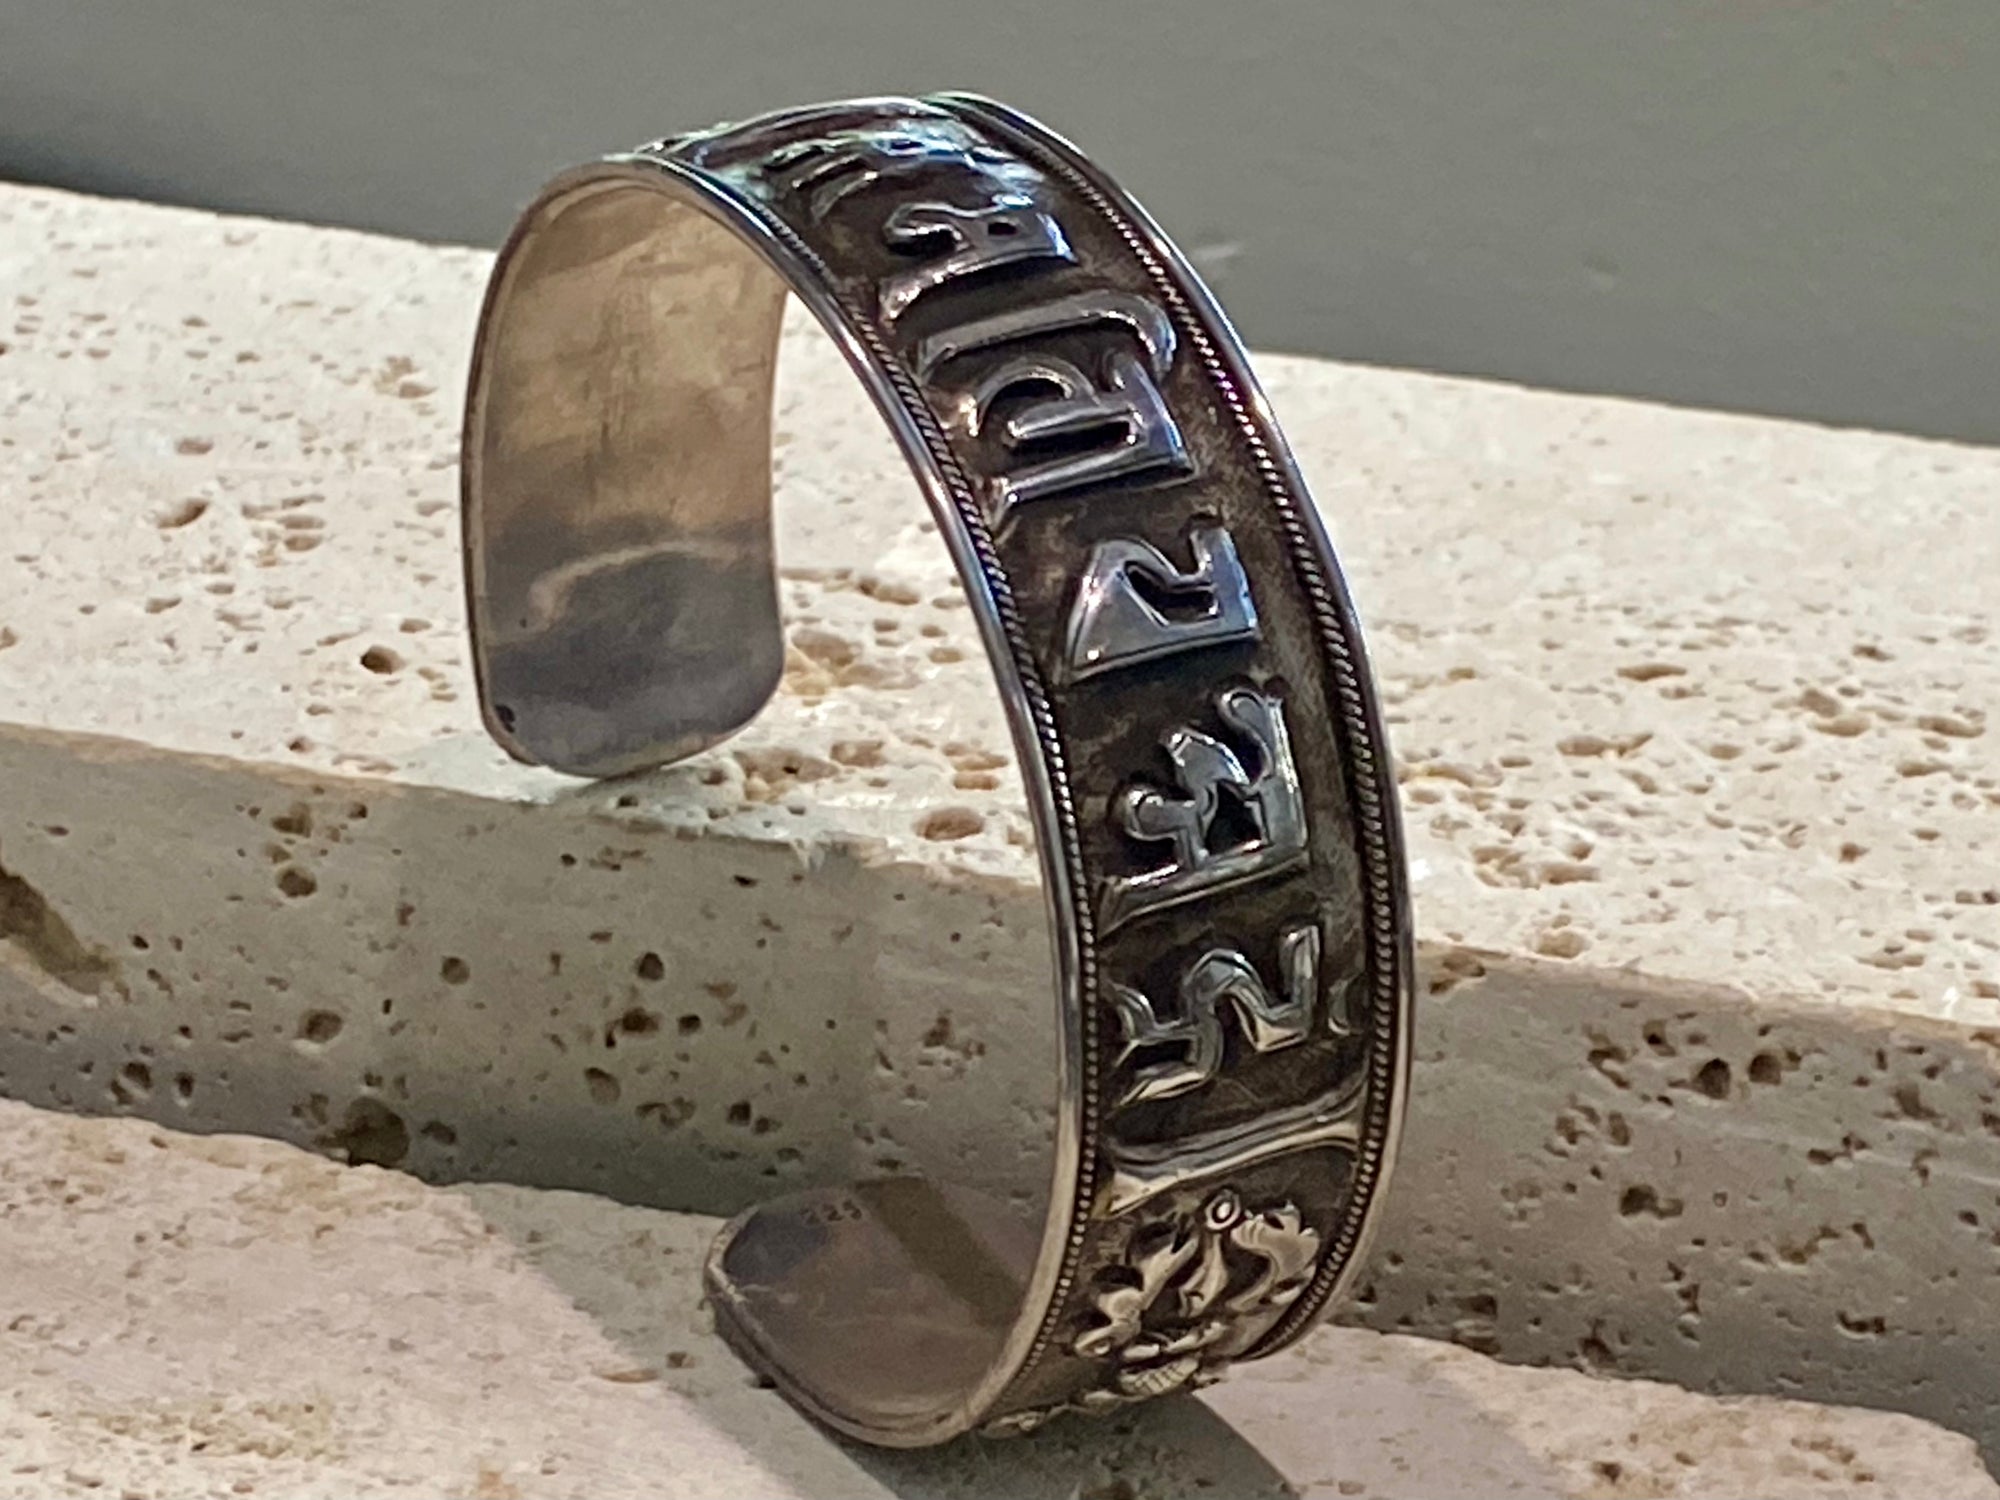 Sterling silver Buddhist Om Manu Padme Hum bracelet. This is a large and substantial men's silver cuff  This beloved Buddhist mantra translates to “hail, jewel in the lotus” and is the prayer of the Compassionate Buddha Avelokitsvara.